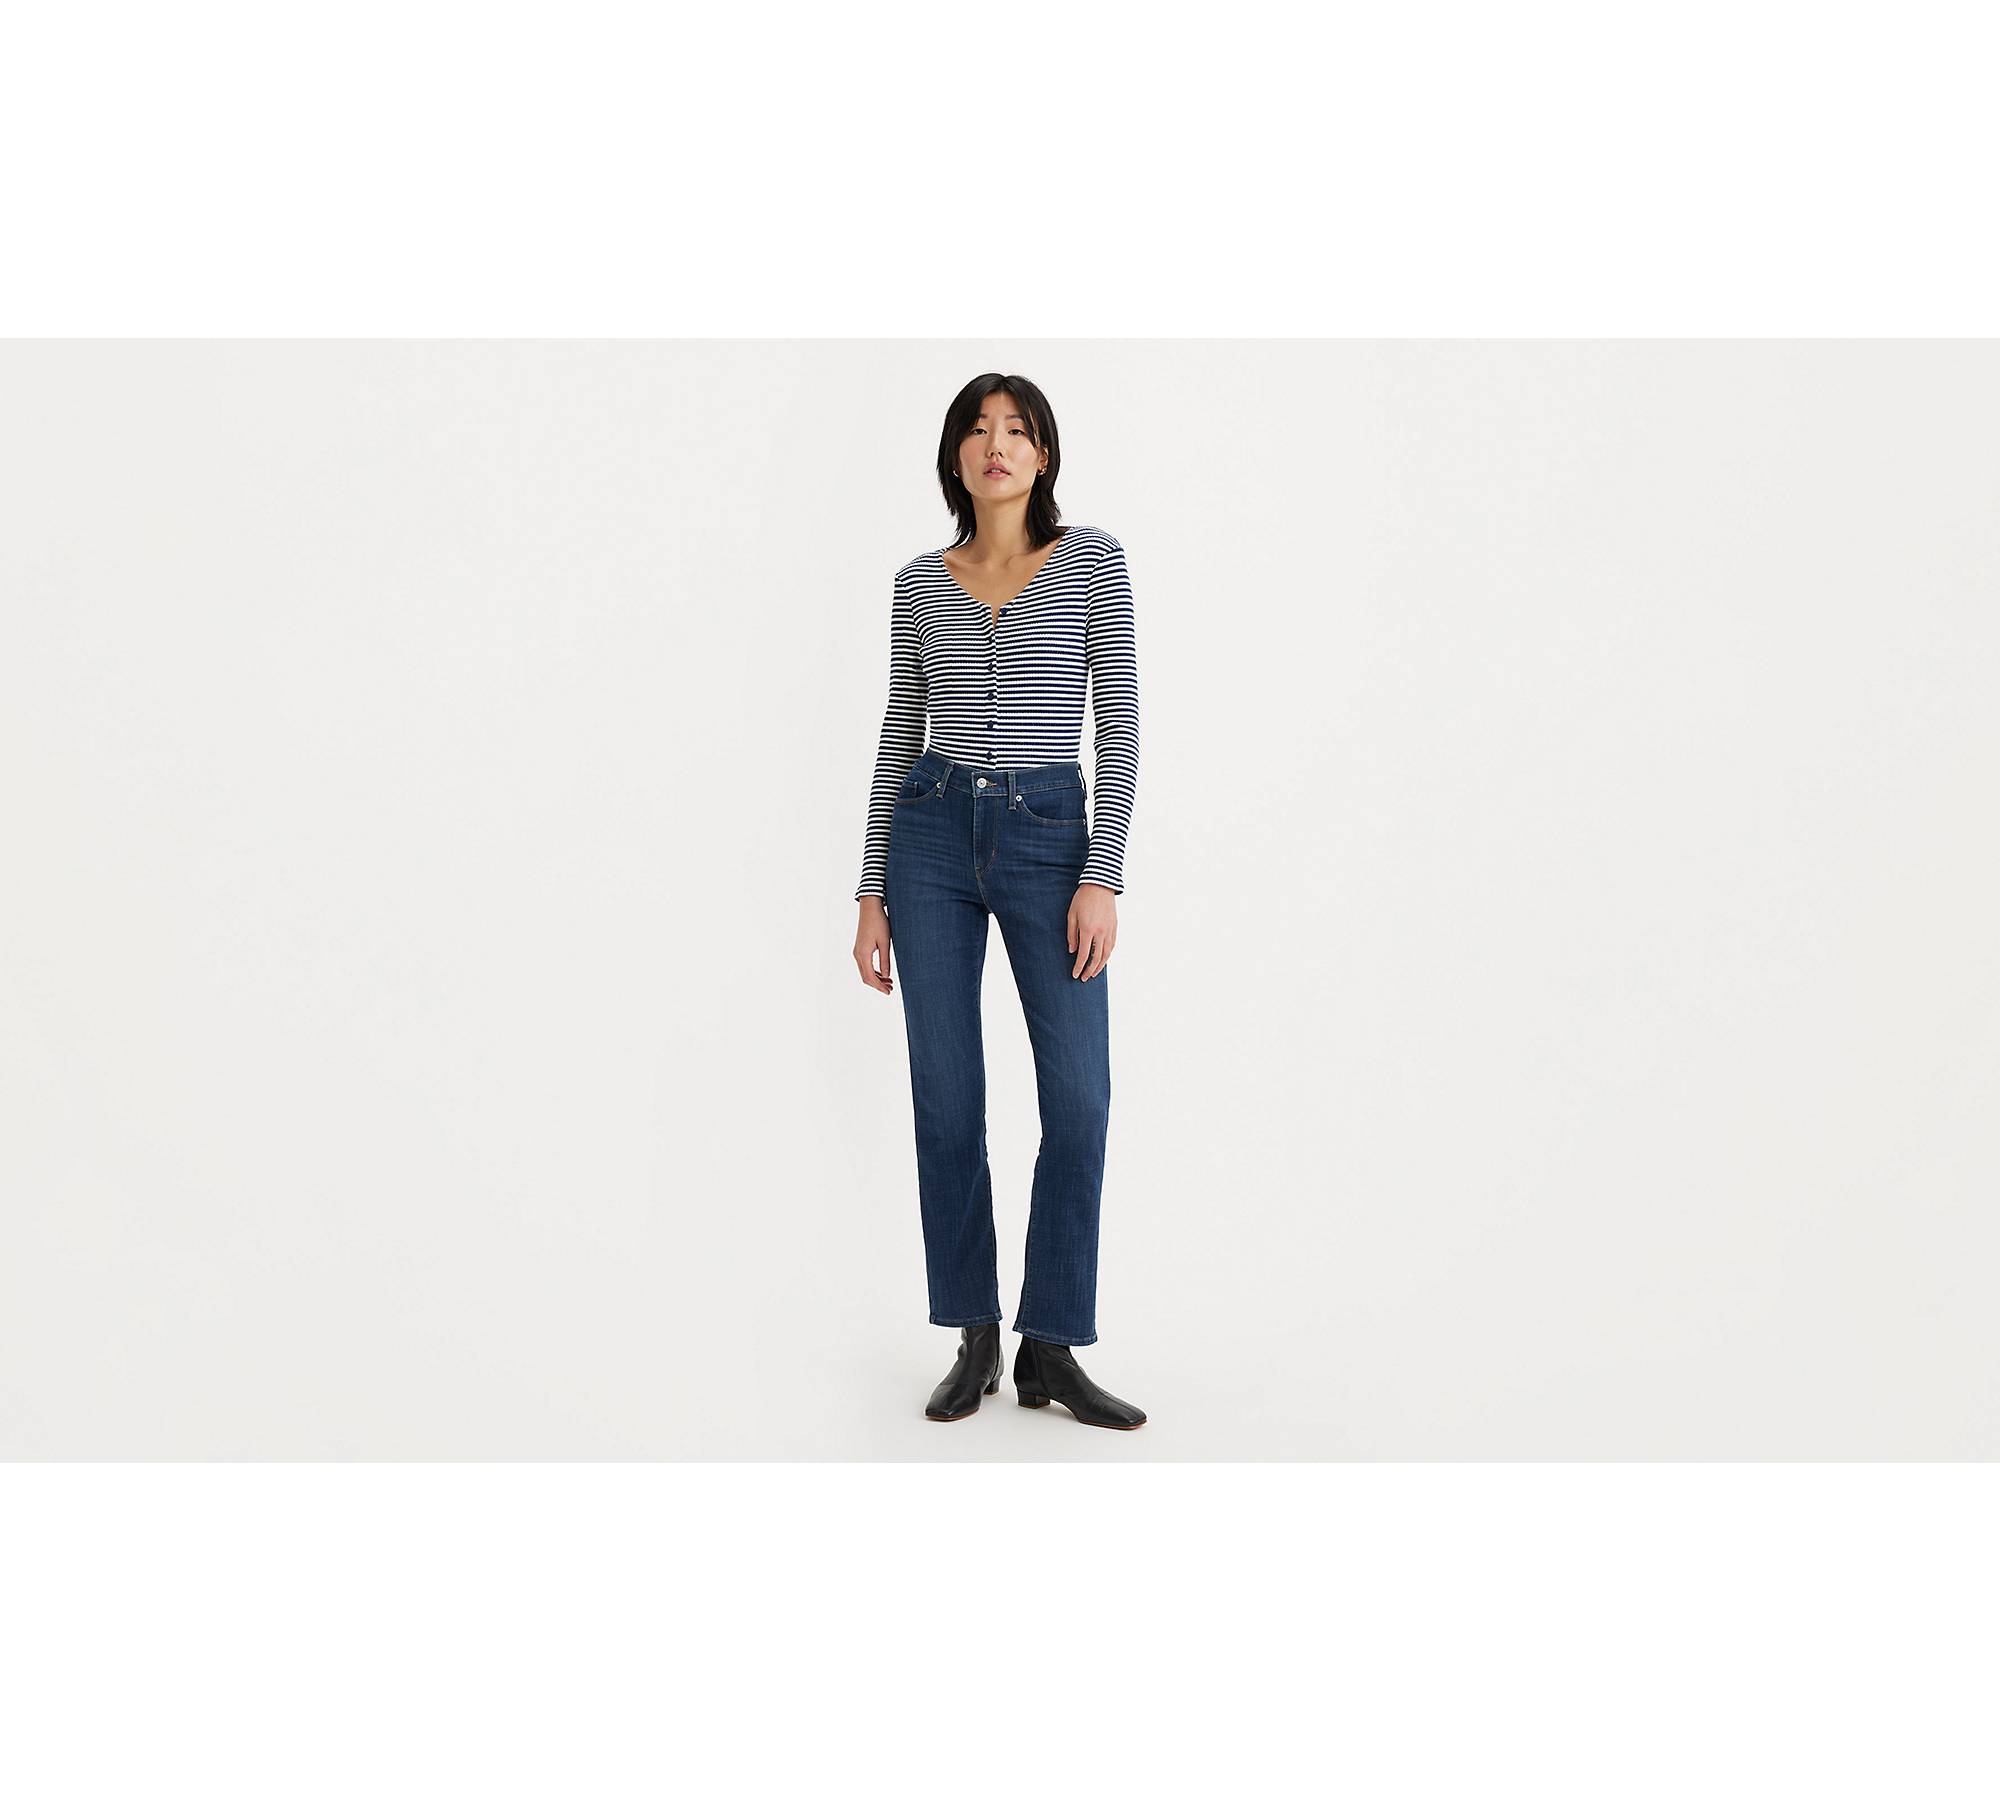 Levi's 392500002 Womens Classic Straight Fit Jeans Seattle Blues